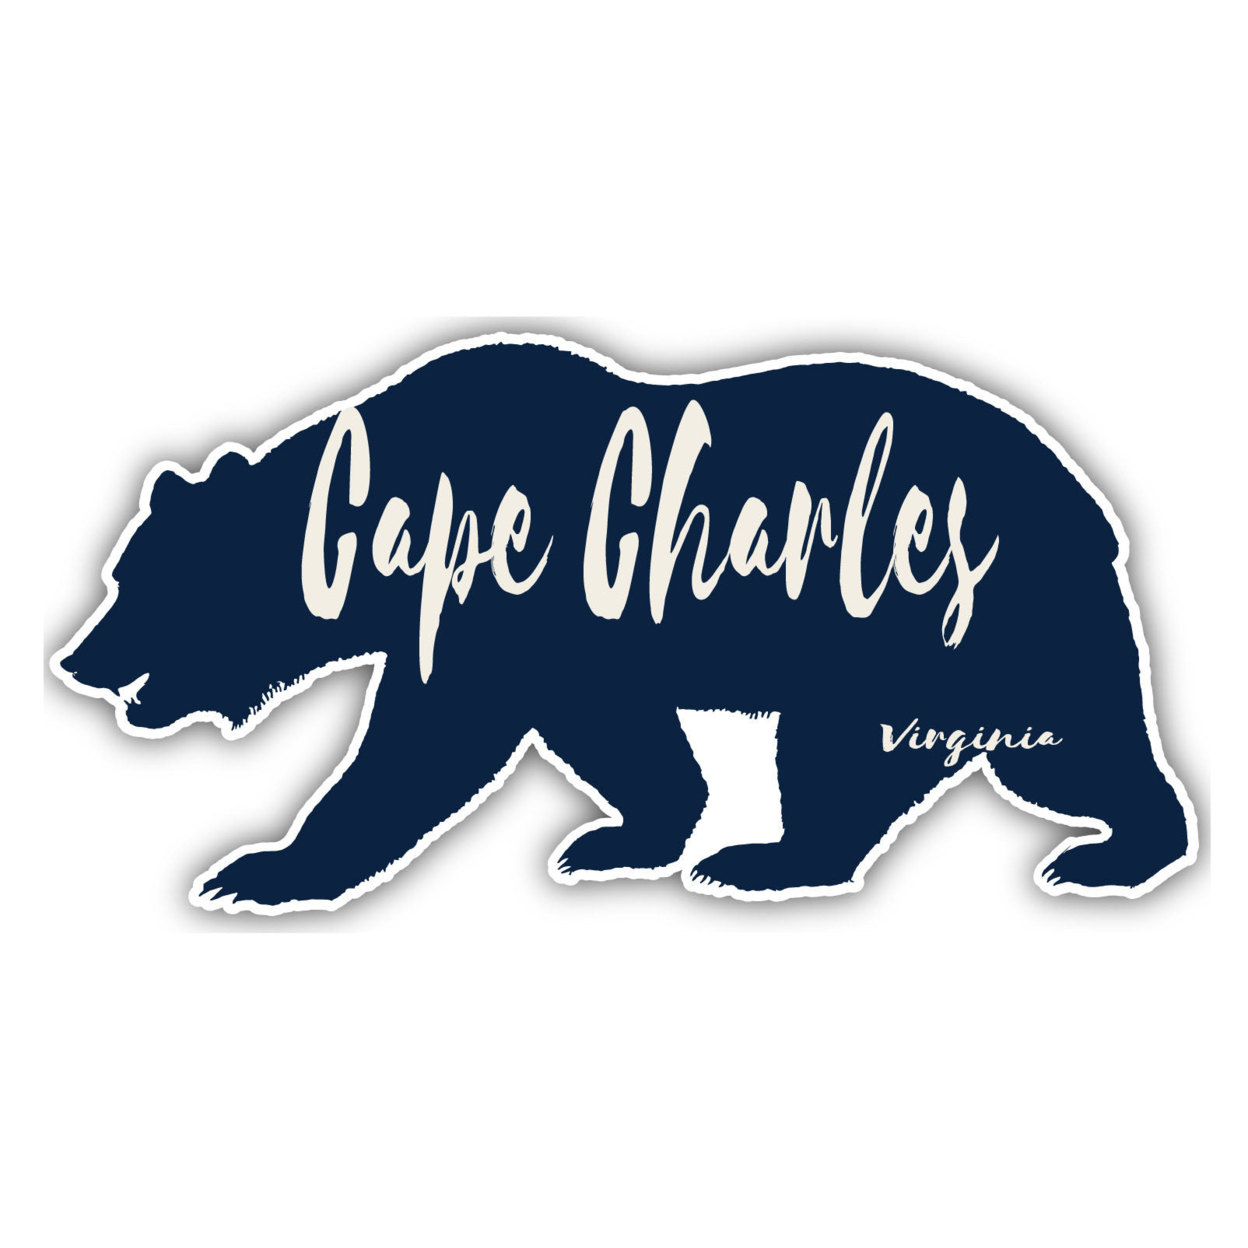 Cape Charles Virginia Souvenir Decorative Stickers (Choose Theme And Size) - 4-Pack, 4-Inch, Camp Life